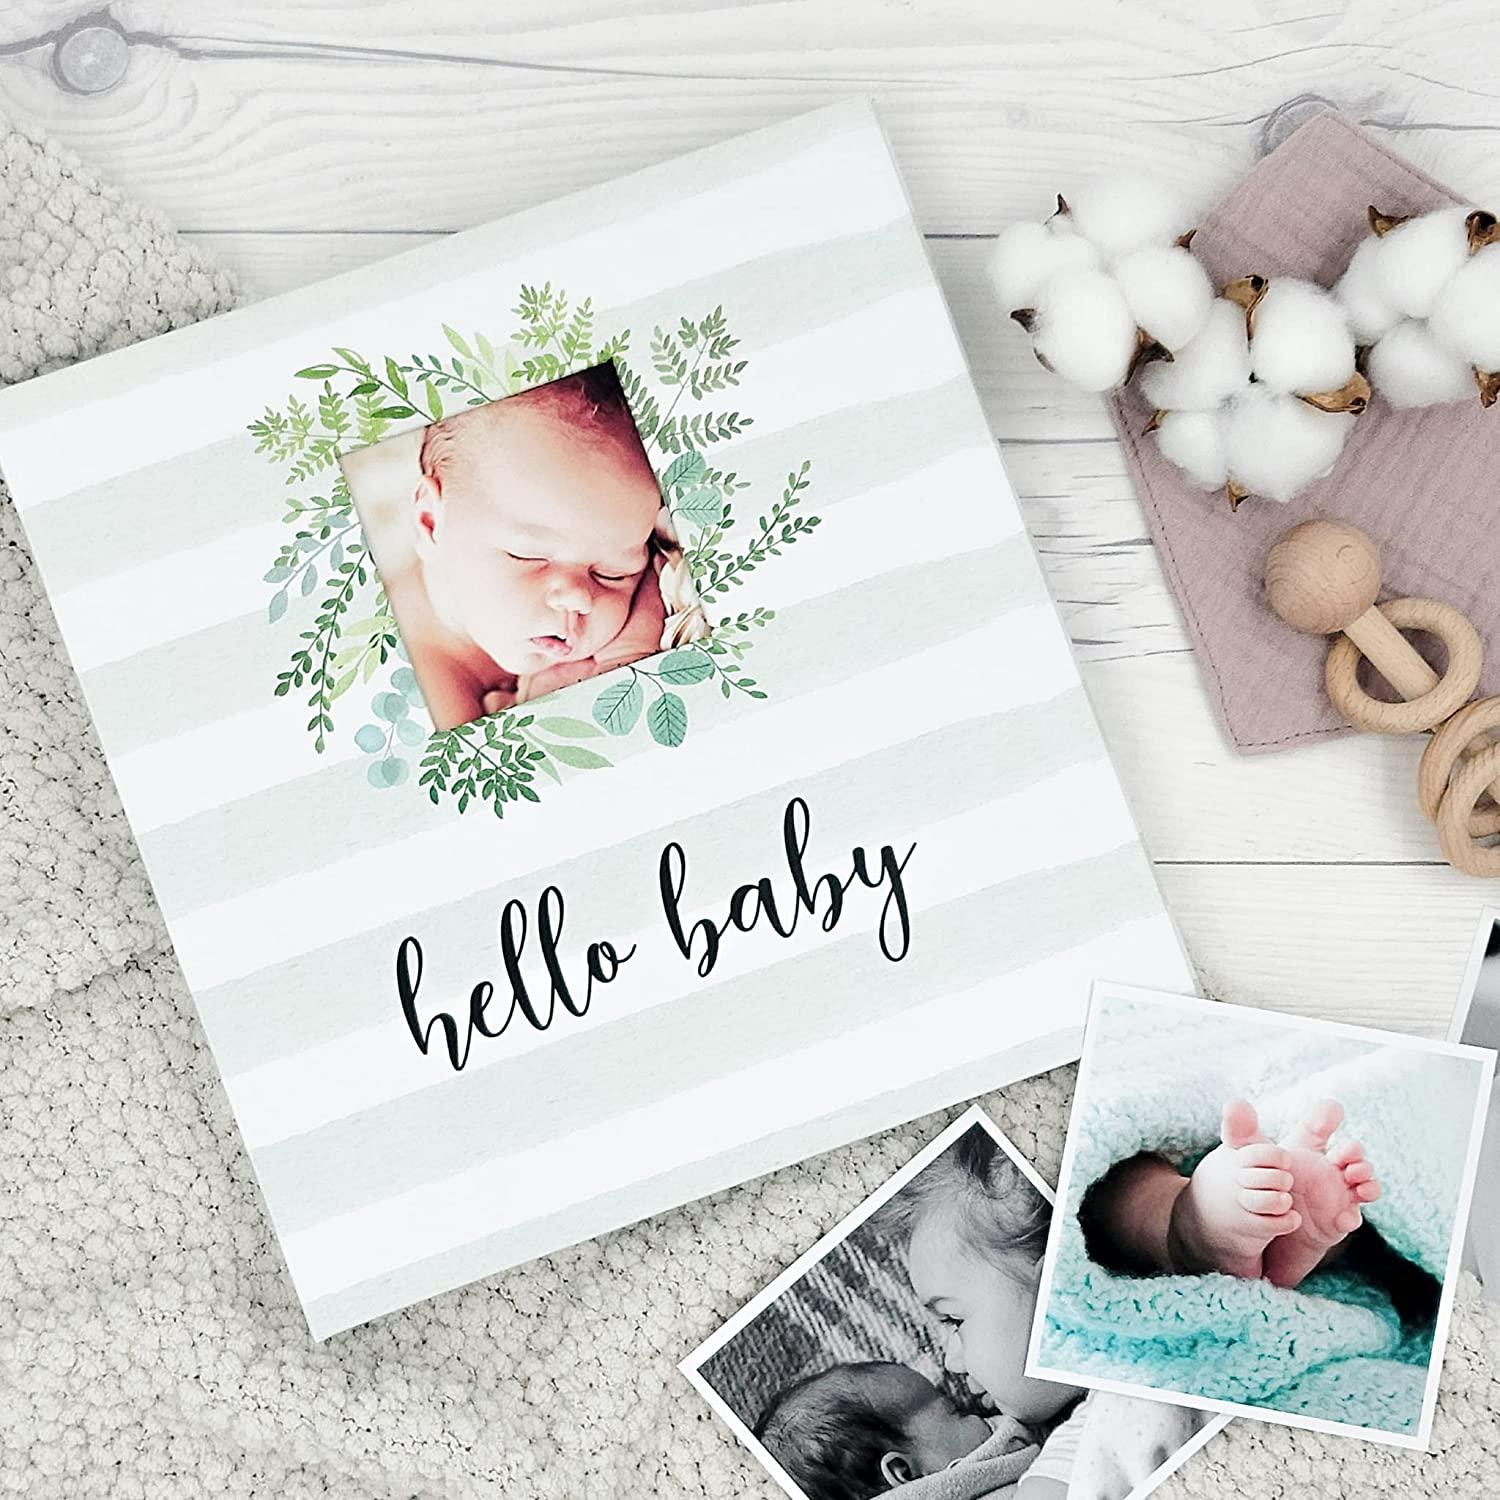 Hello Baby: A Record Book of Milestones and Memories in the First 12 Months